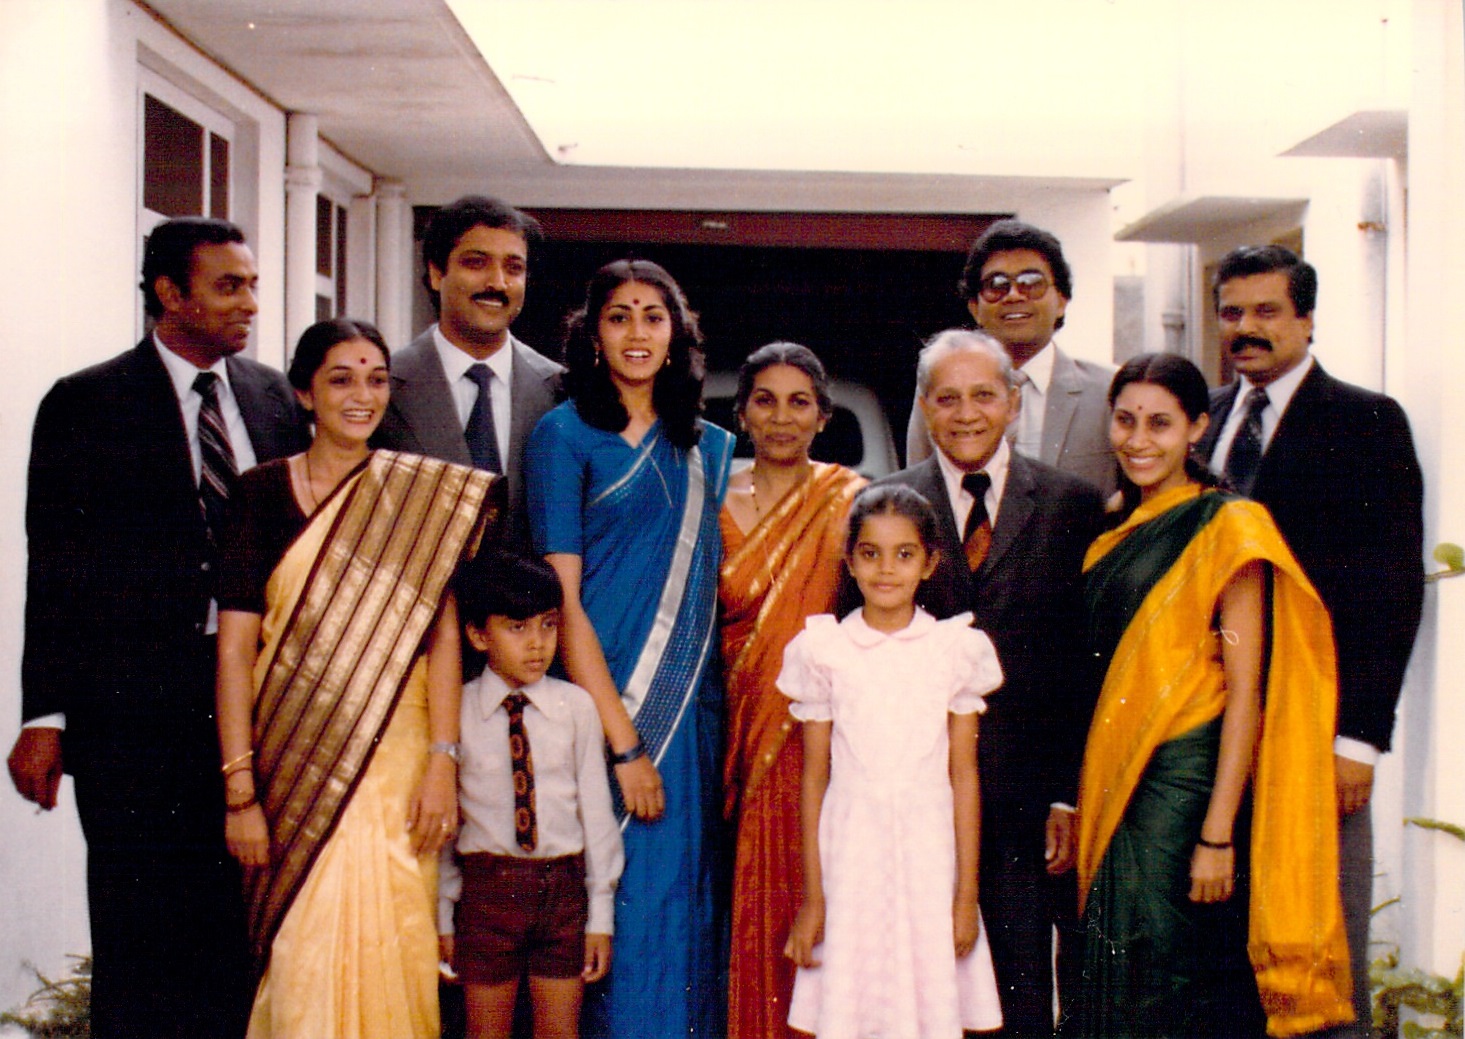 Bhat with her family in Bengaluru, India